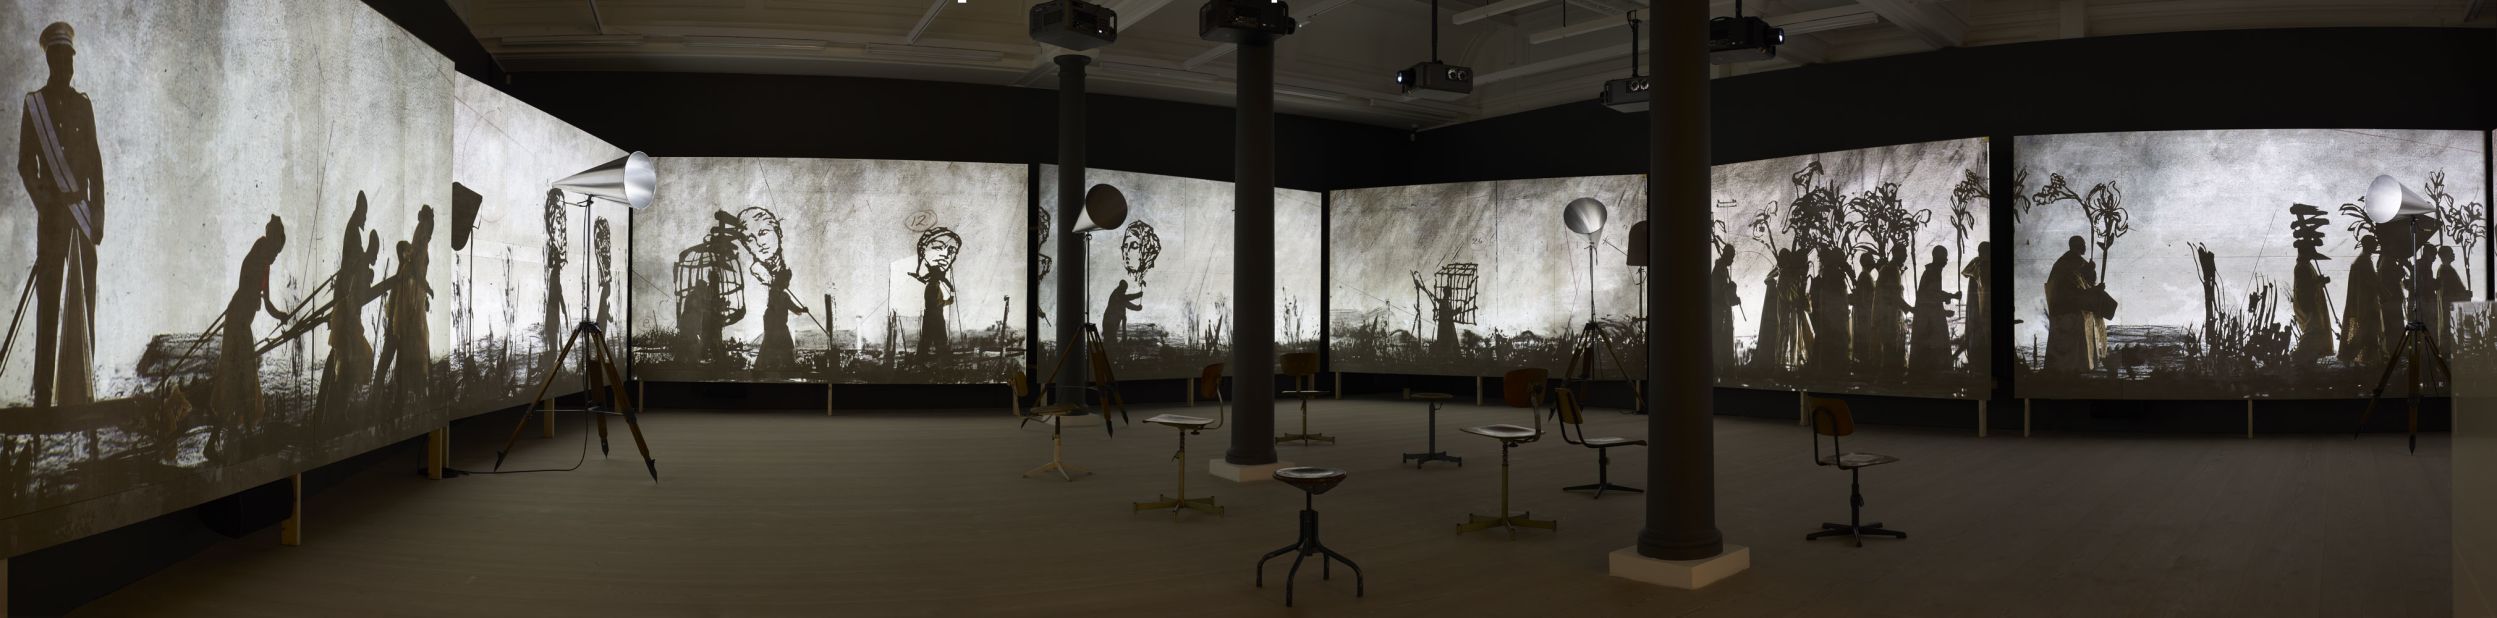 Kentridge says that if he tried to make art that responded directly to great tragedies, he wouldn't be able to. Instead, he begins experimenting with materials, and the images take form. 